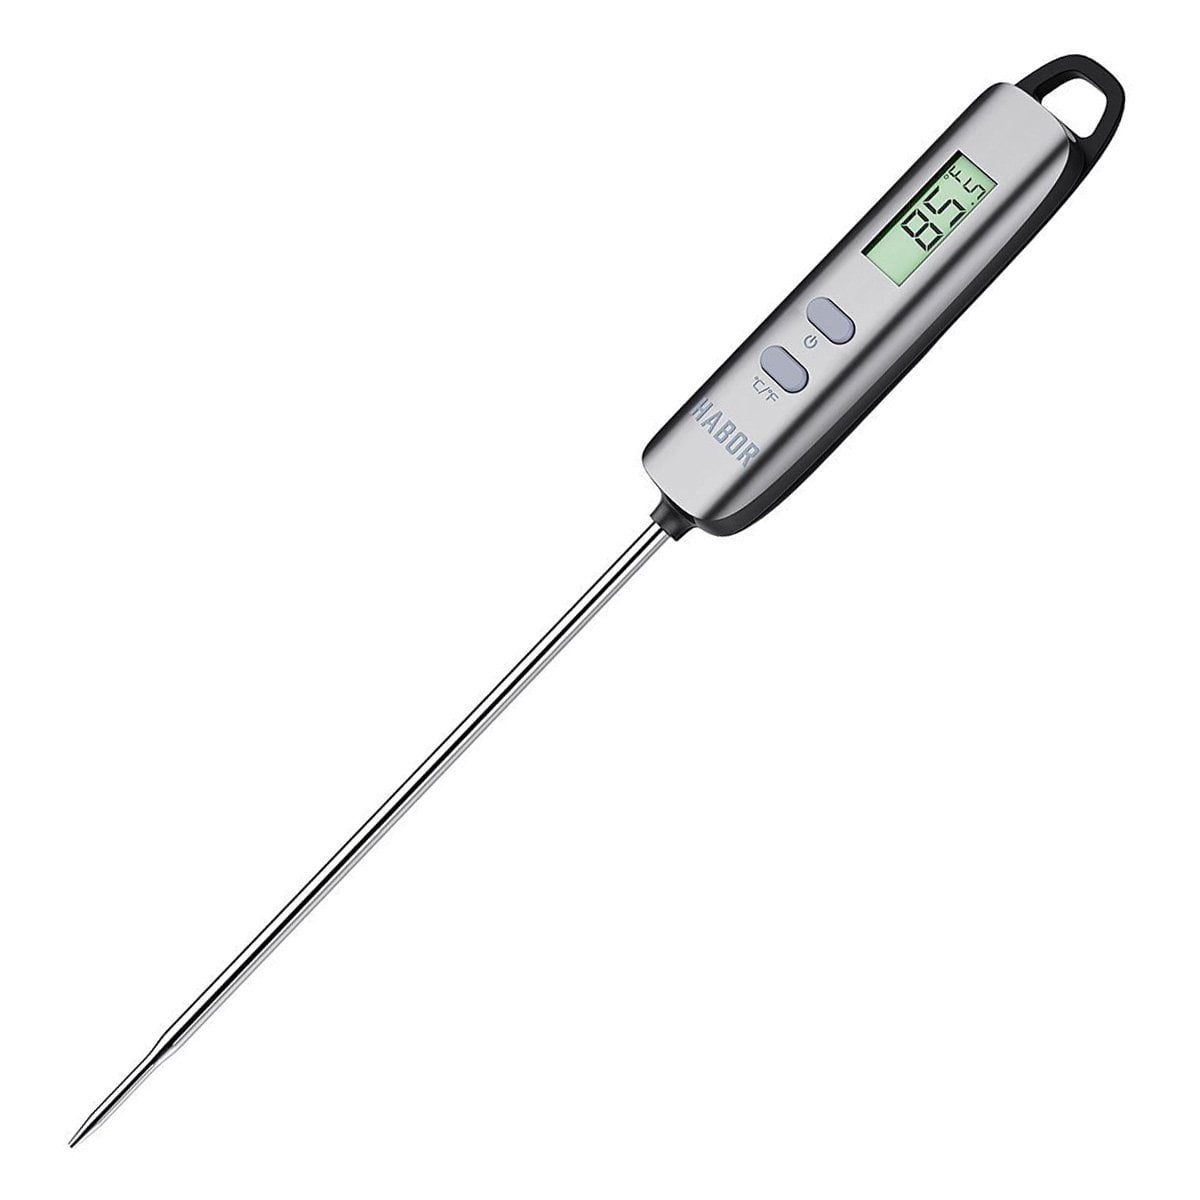 Electronic Meat Thermometer Kitchen Tools Digital Food Thermometers BBQ S8Z6 